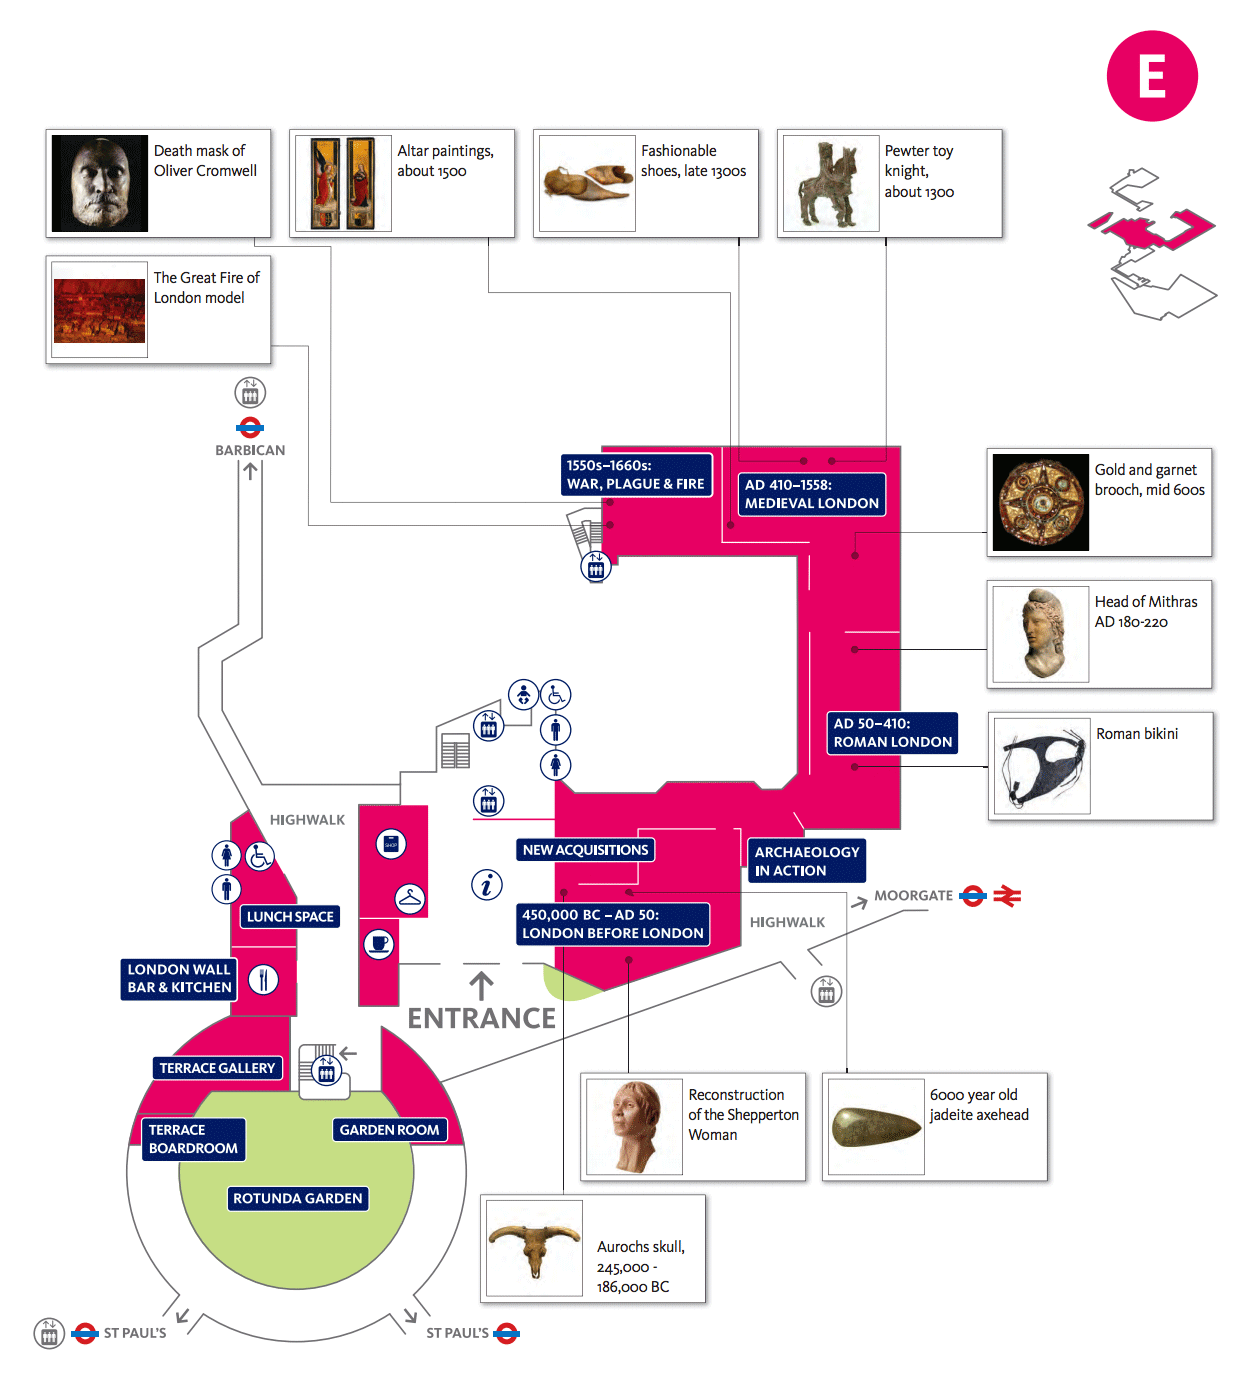 Plan your visit to the Museum of London how to get here